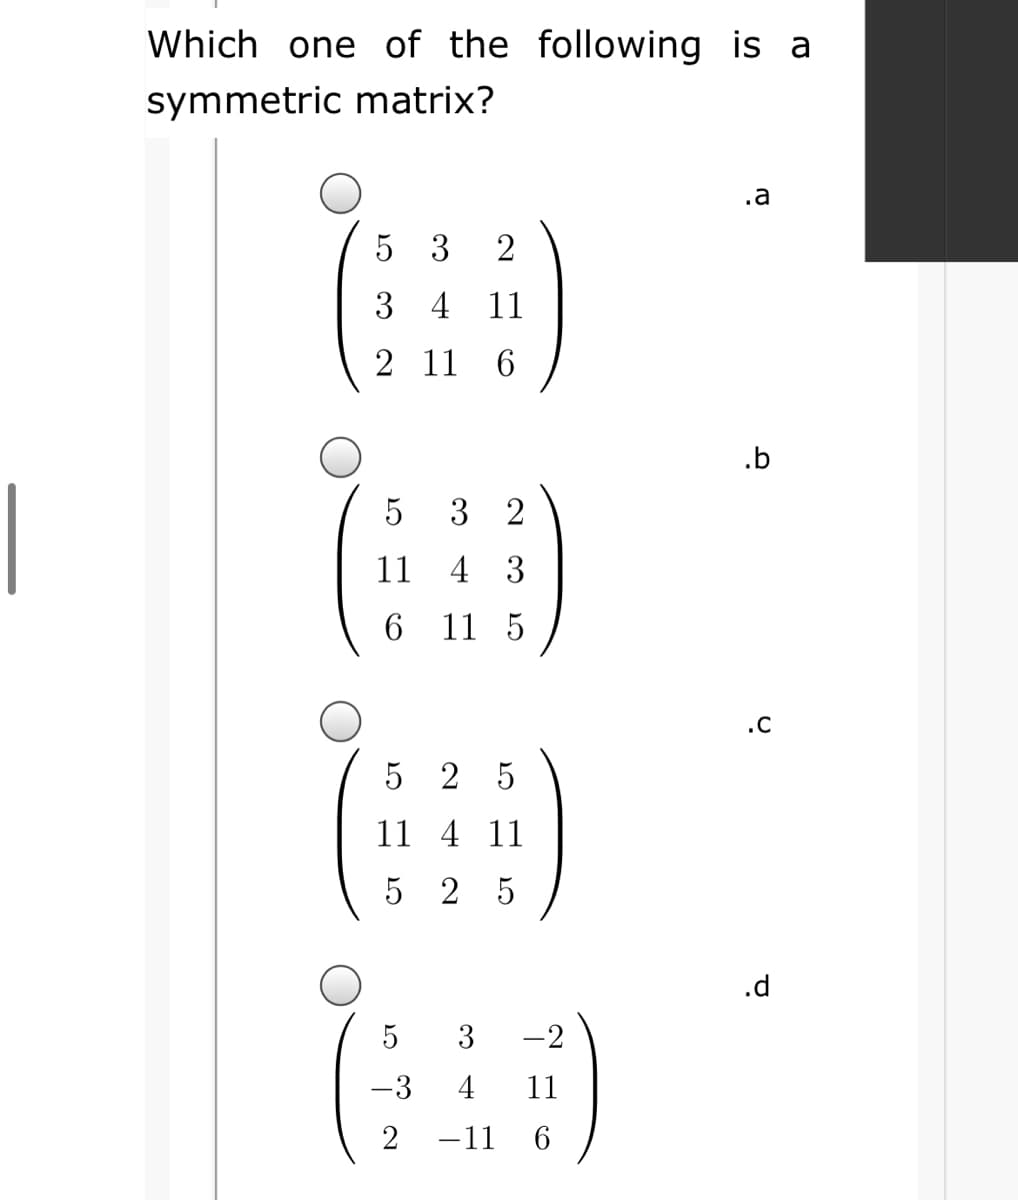 Which one of the following is a
symmetric matrix?
.a
5 3
2
3 4 11
2 11
6.
.b
|
3 2
11
4 3
11 5
.C
5 2 5
11 4 11
5 2 5
.d
3
-2
-3
4
11
-11
6
